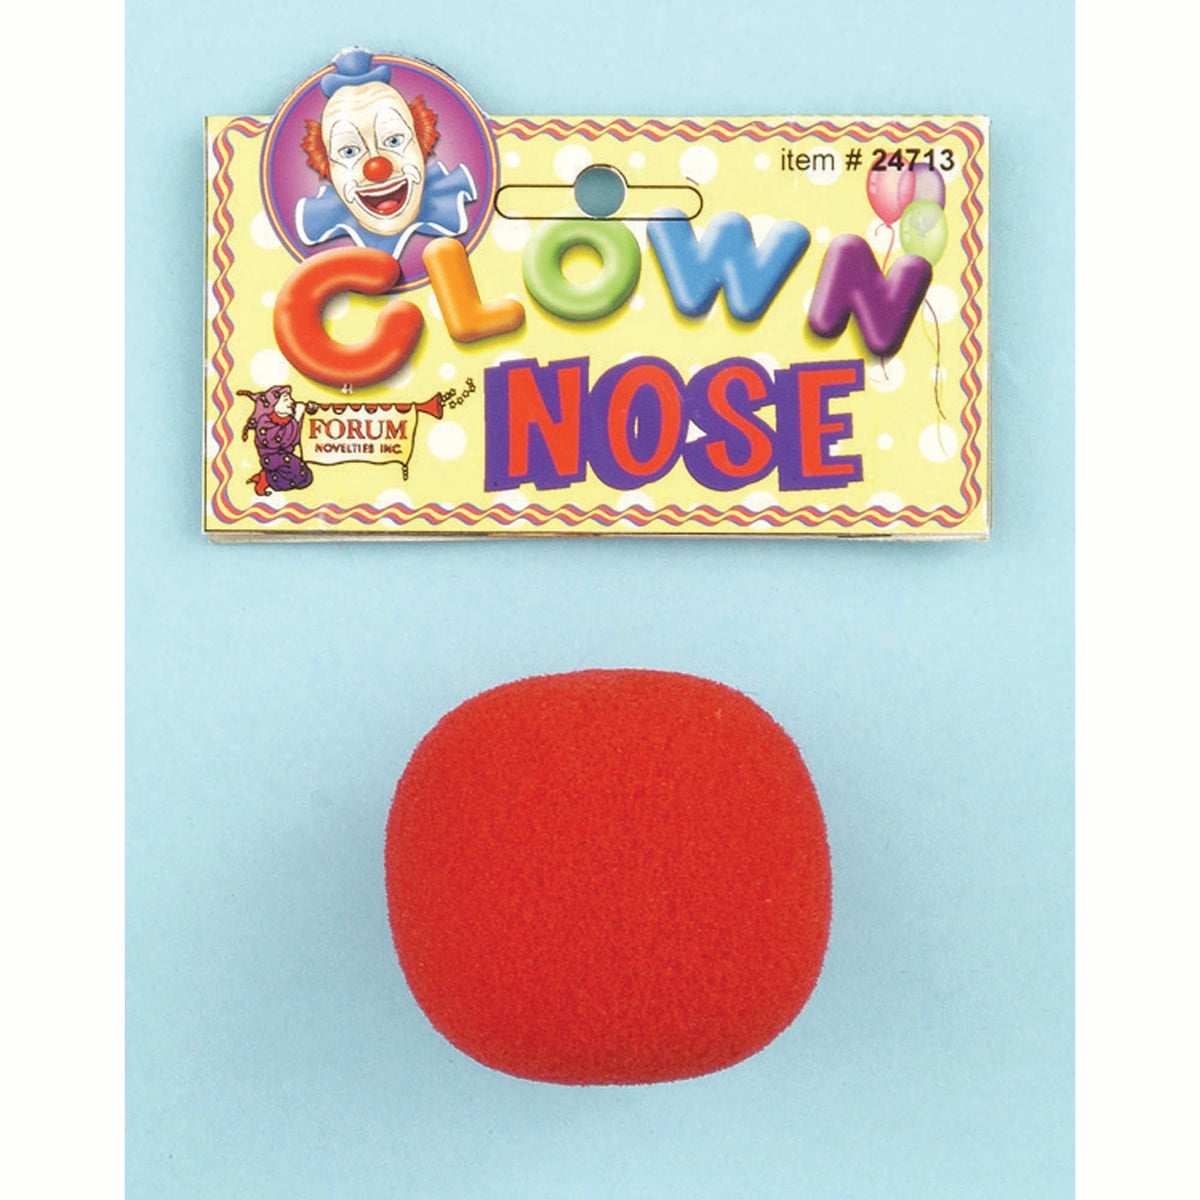 RUBIES II (Ruby Slipper Sales) Costume Accessories Red Clown Nose, 1 Count 721773247132